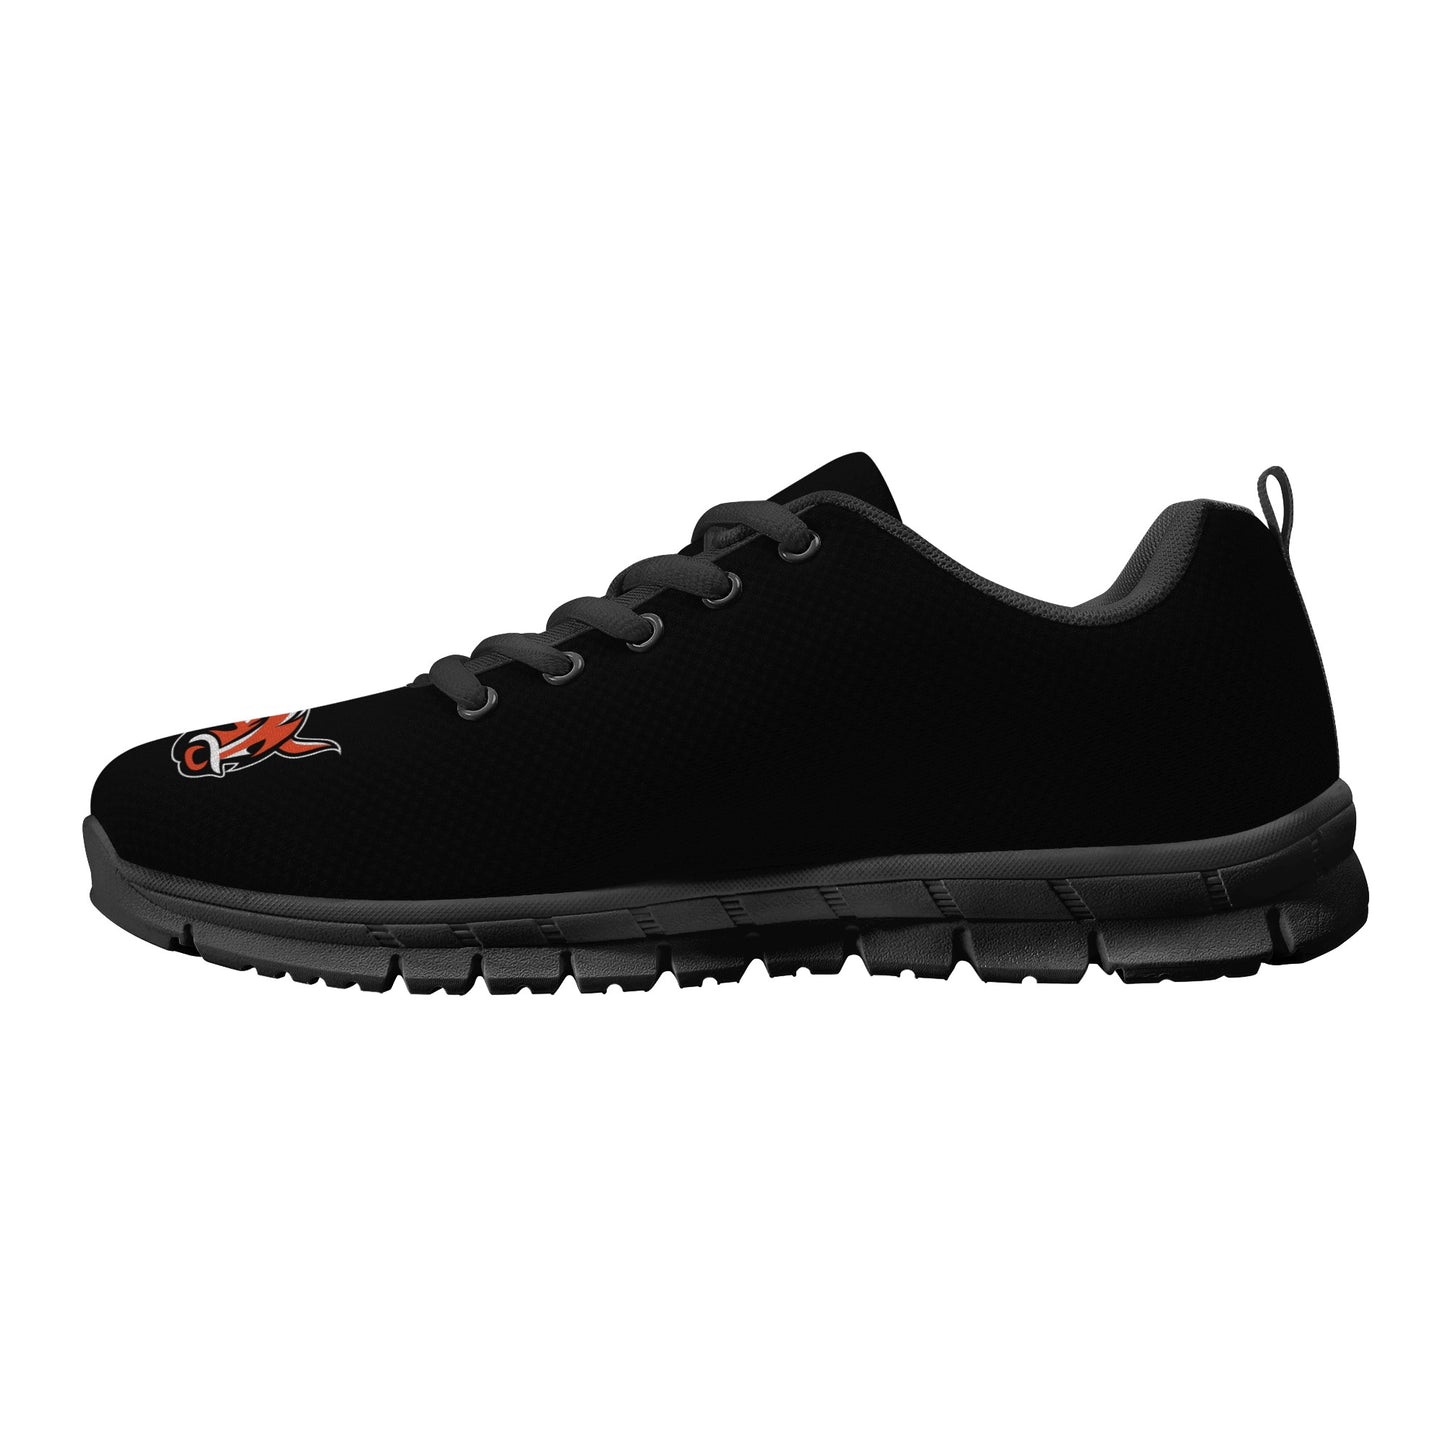 Stampede Mens Running Shoes(free shipping)